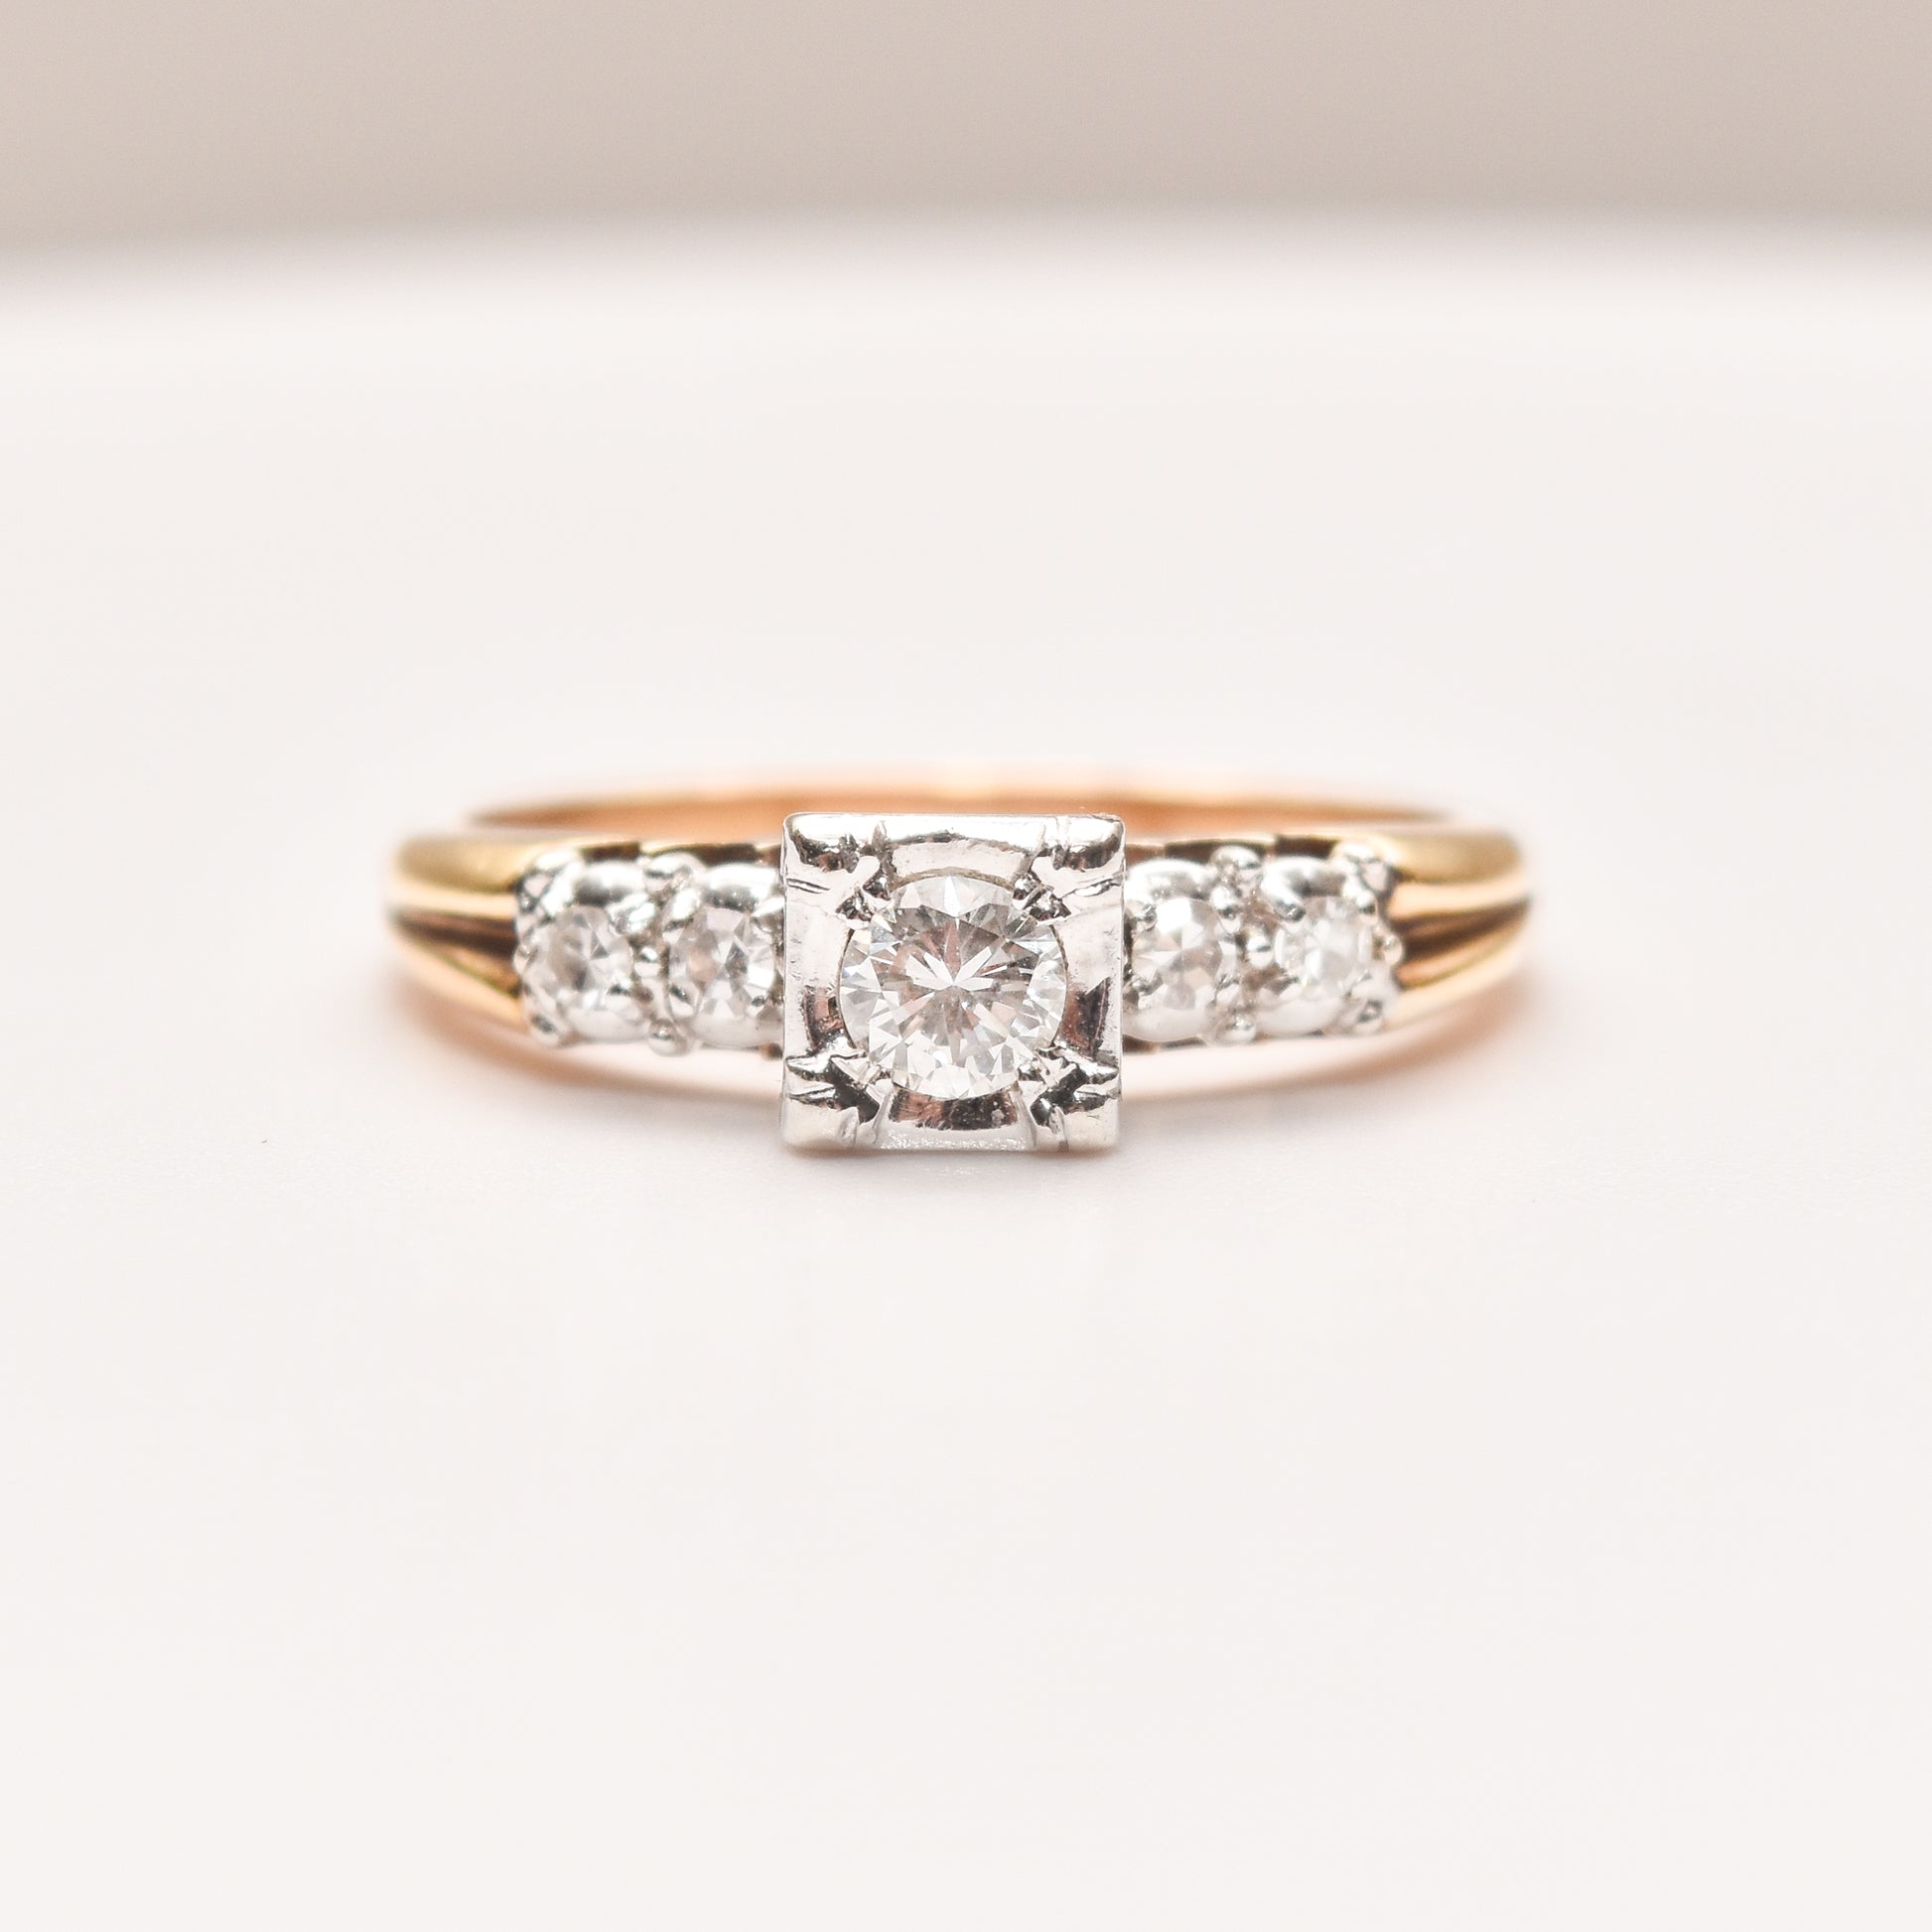 14K two-tone gold diamond engagement ring with a .25 carat brilliant center stone and side diamonds, size 9 US, displayed on a white background.